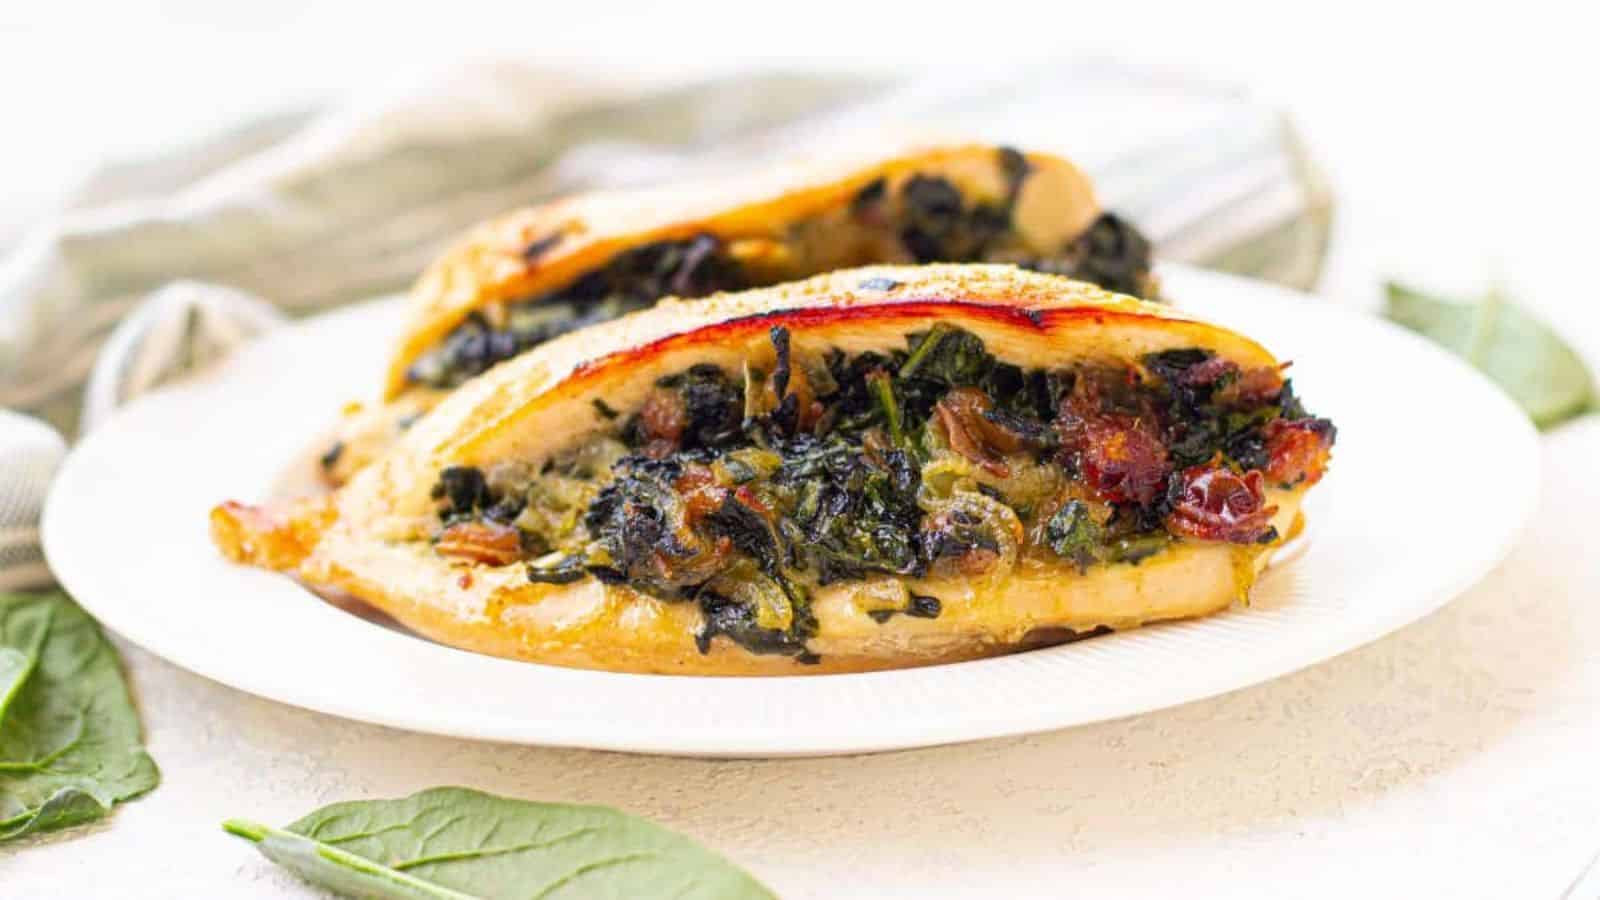 Chicken breasts stuffed with spinach and dates on a white plate.